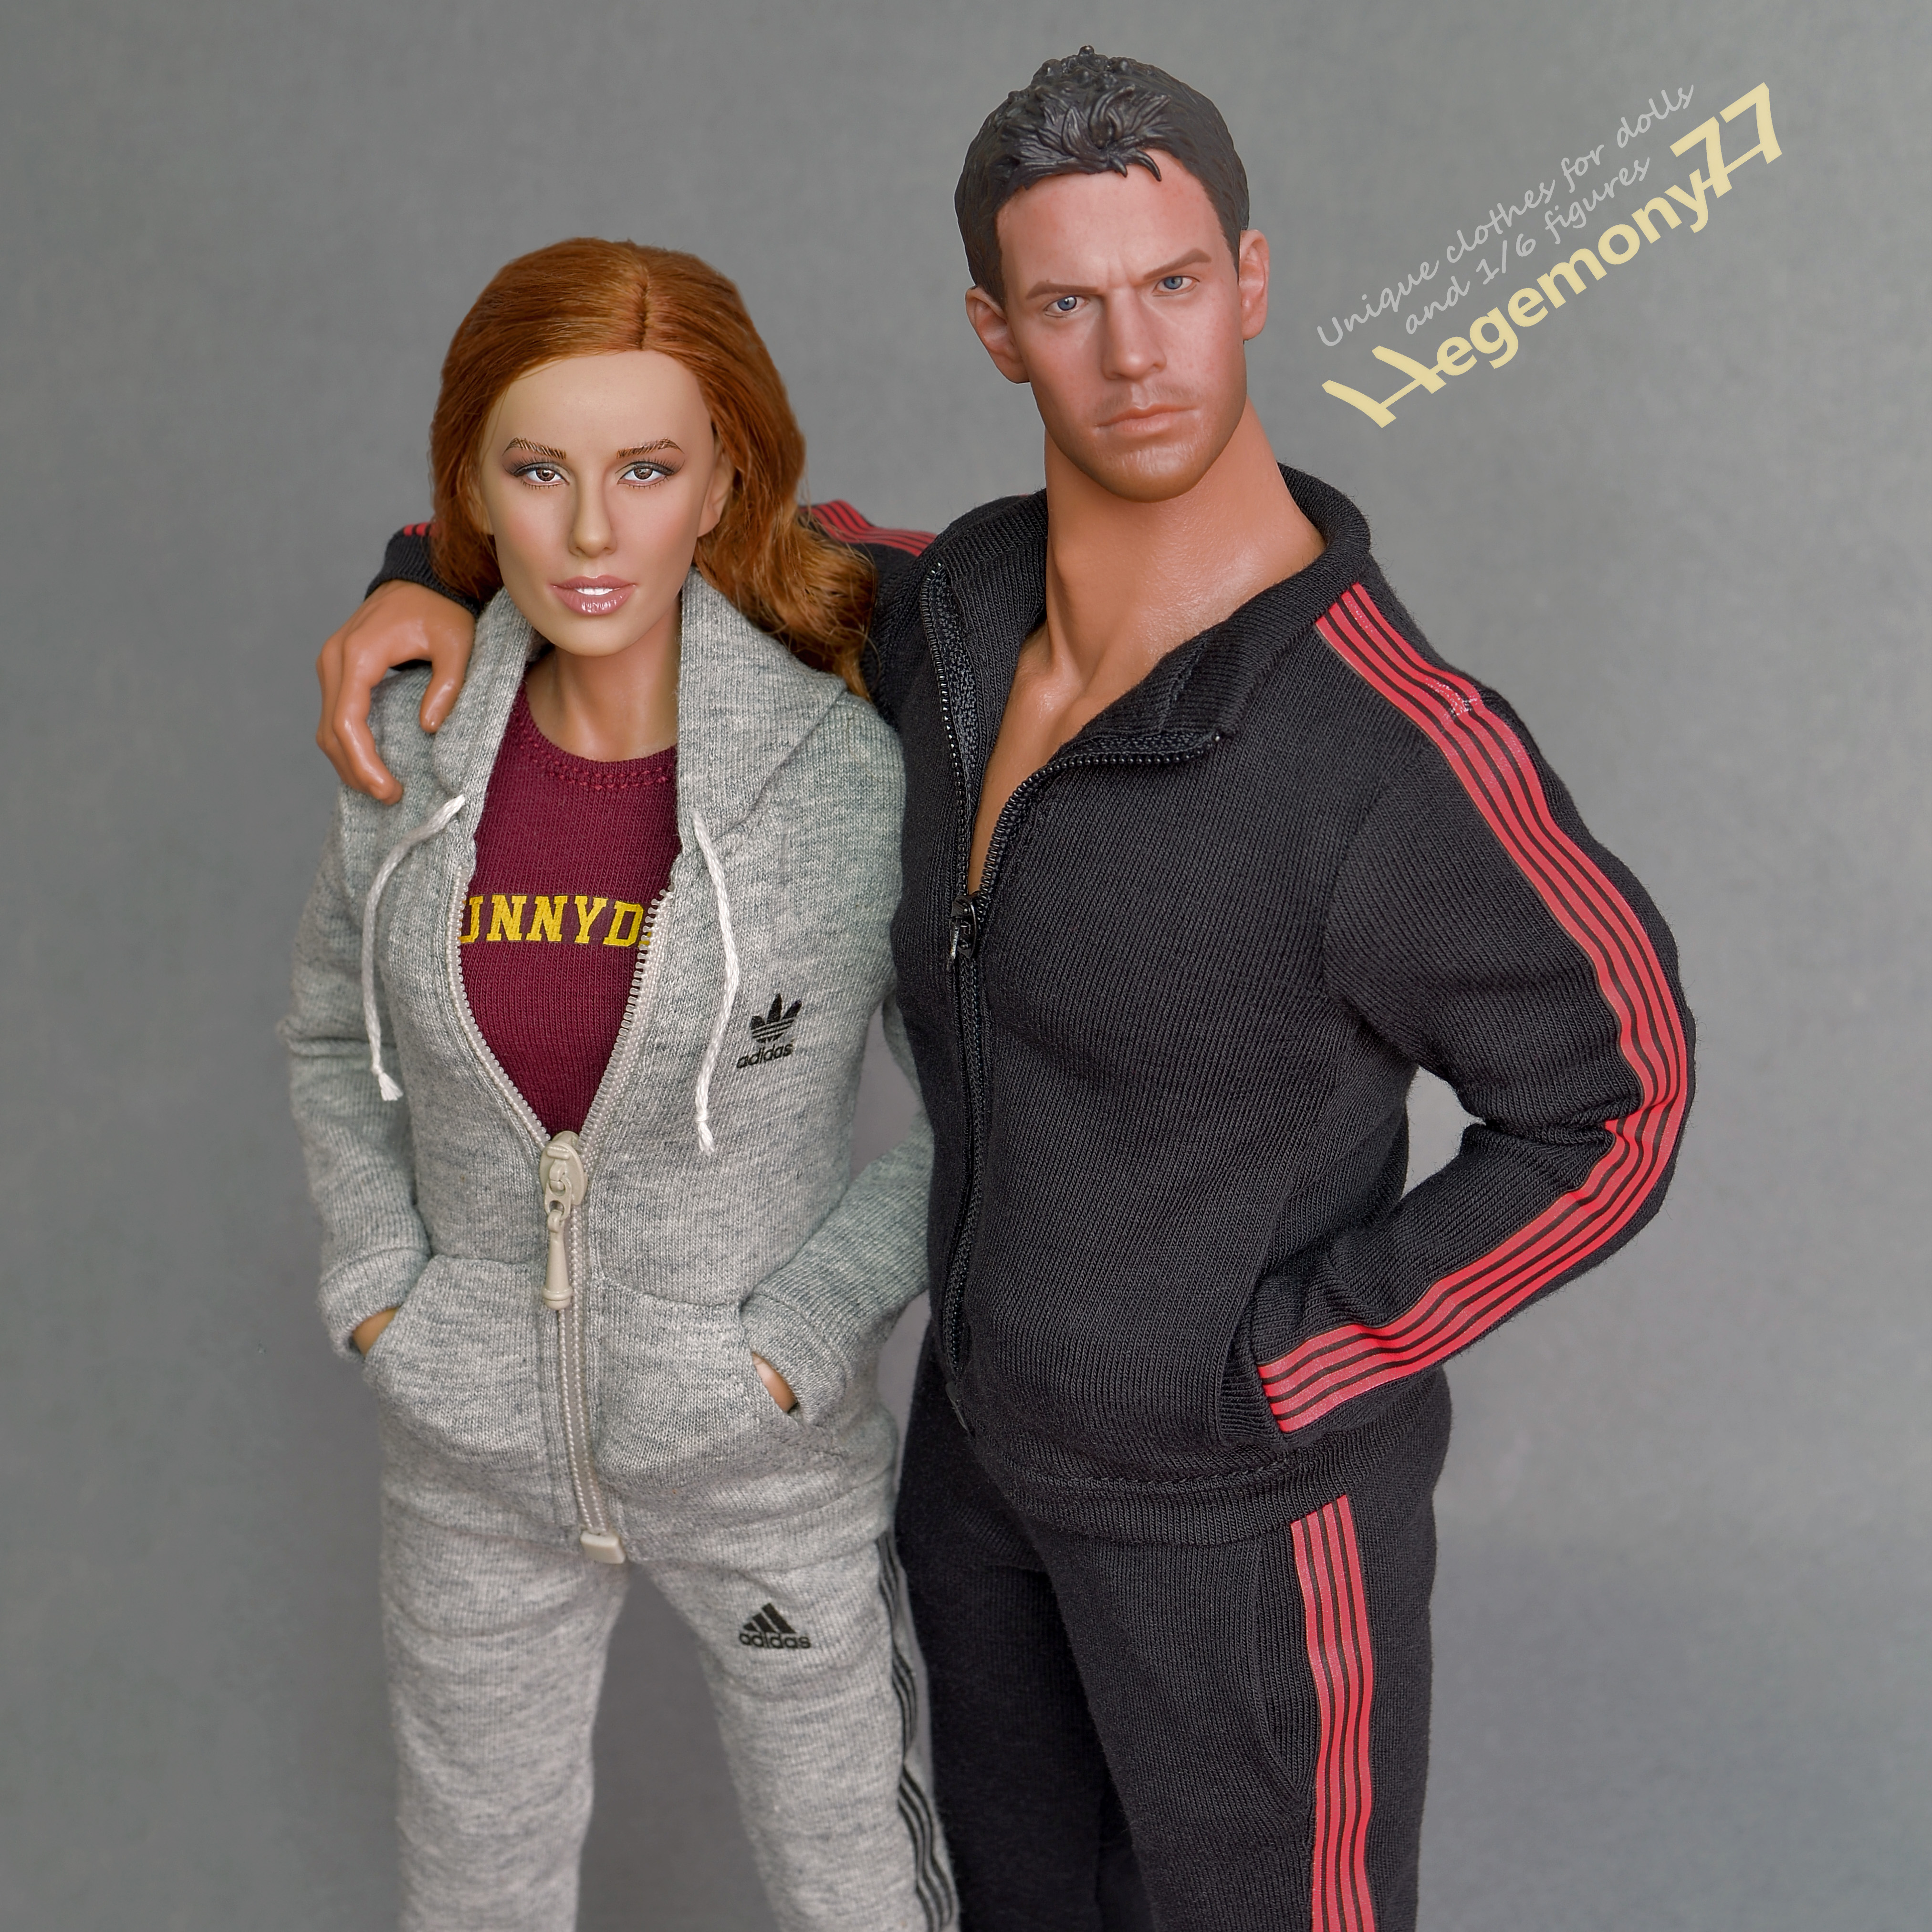 1/6 scale custom clothes – tracksuits and